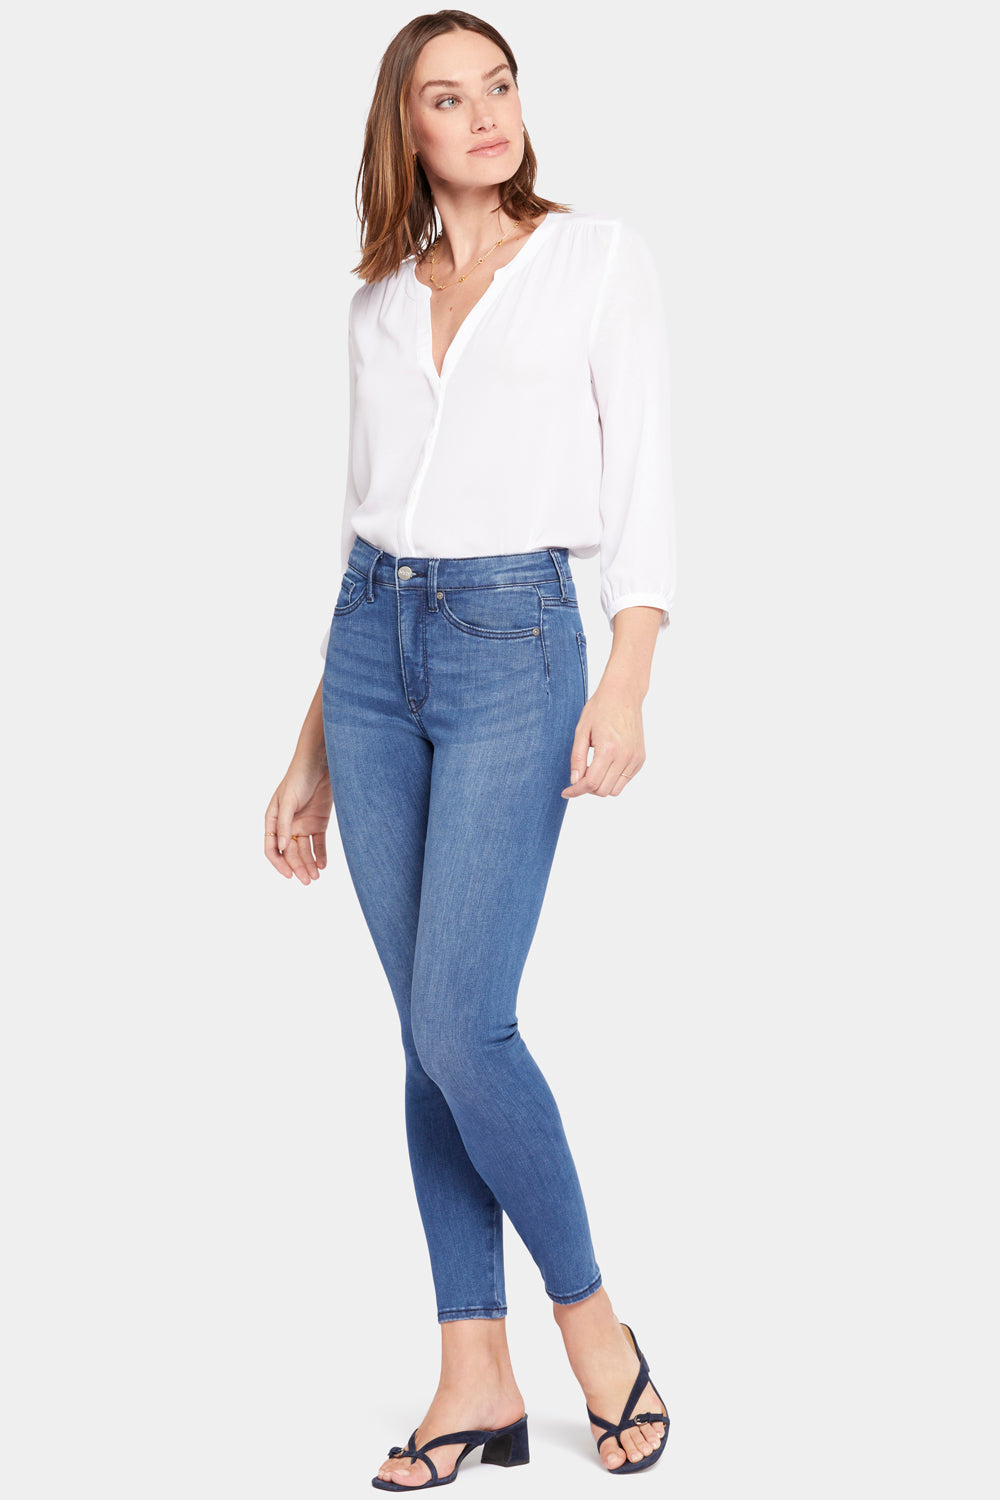 NYDJ Le Silhouette Ami Skinny Jeans In Petite With High Rise - Amour